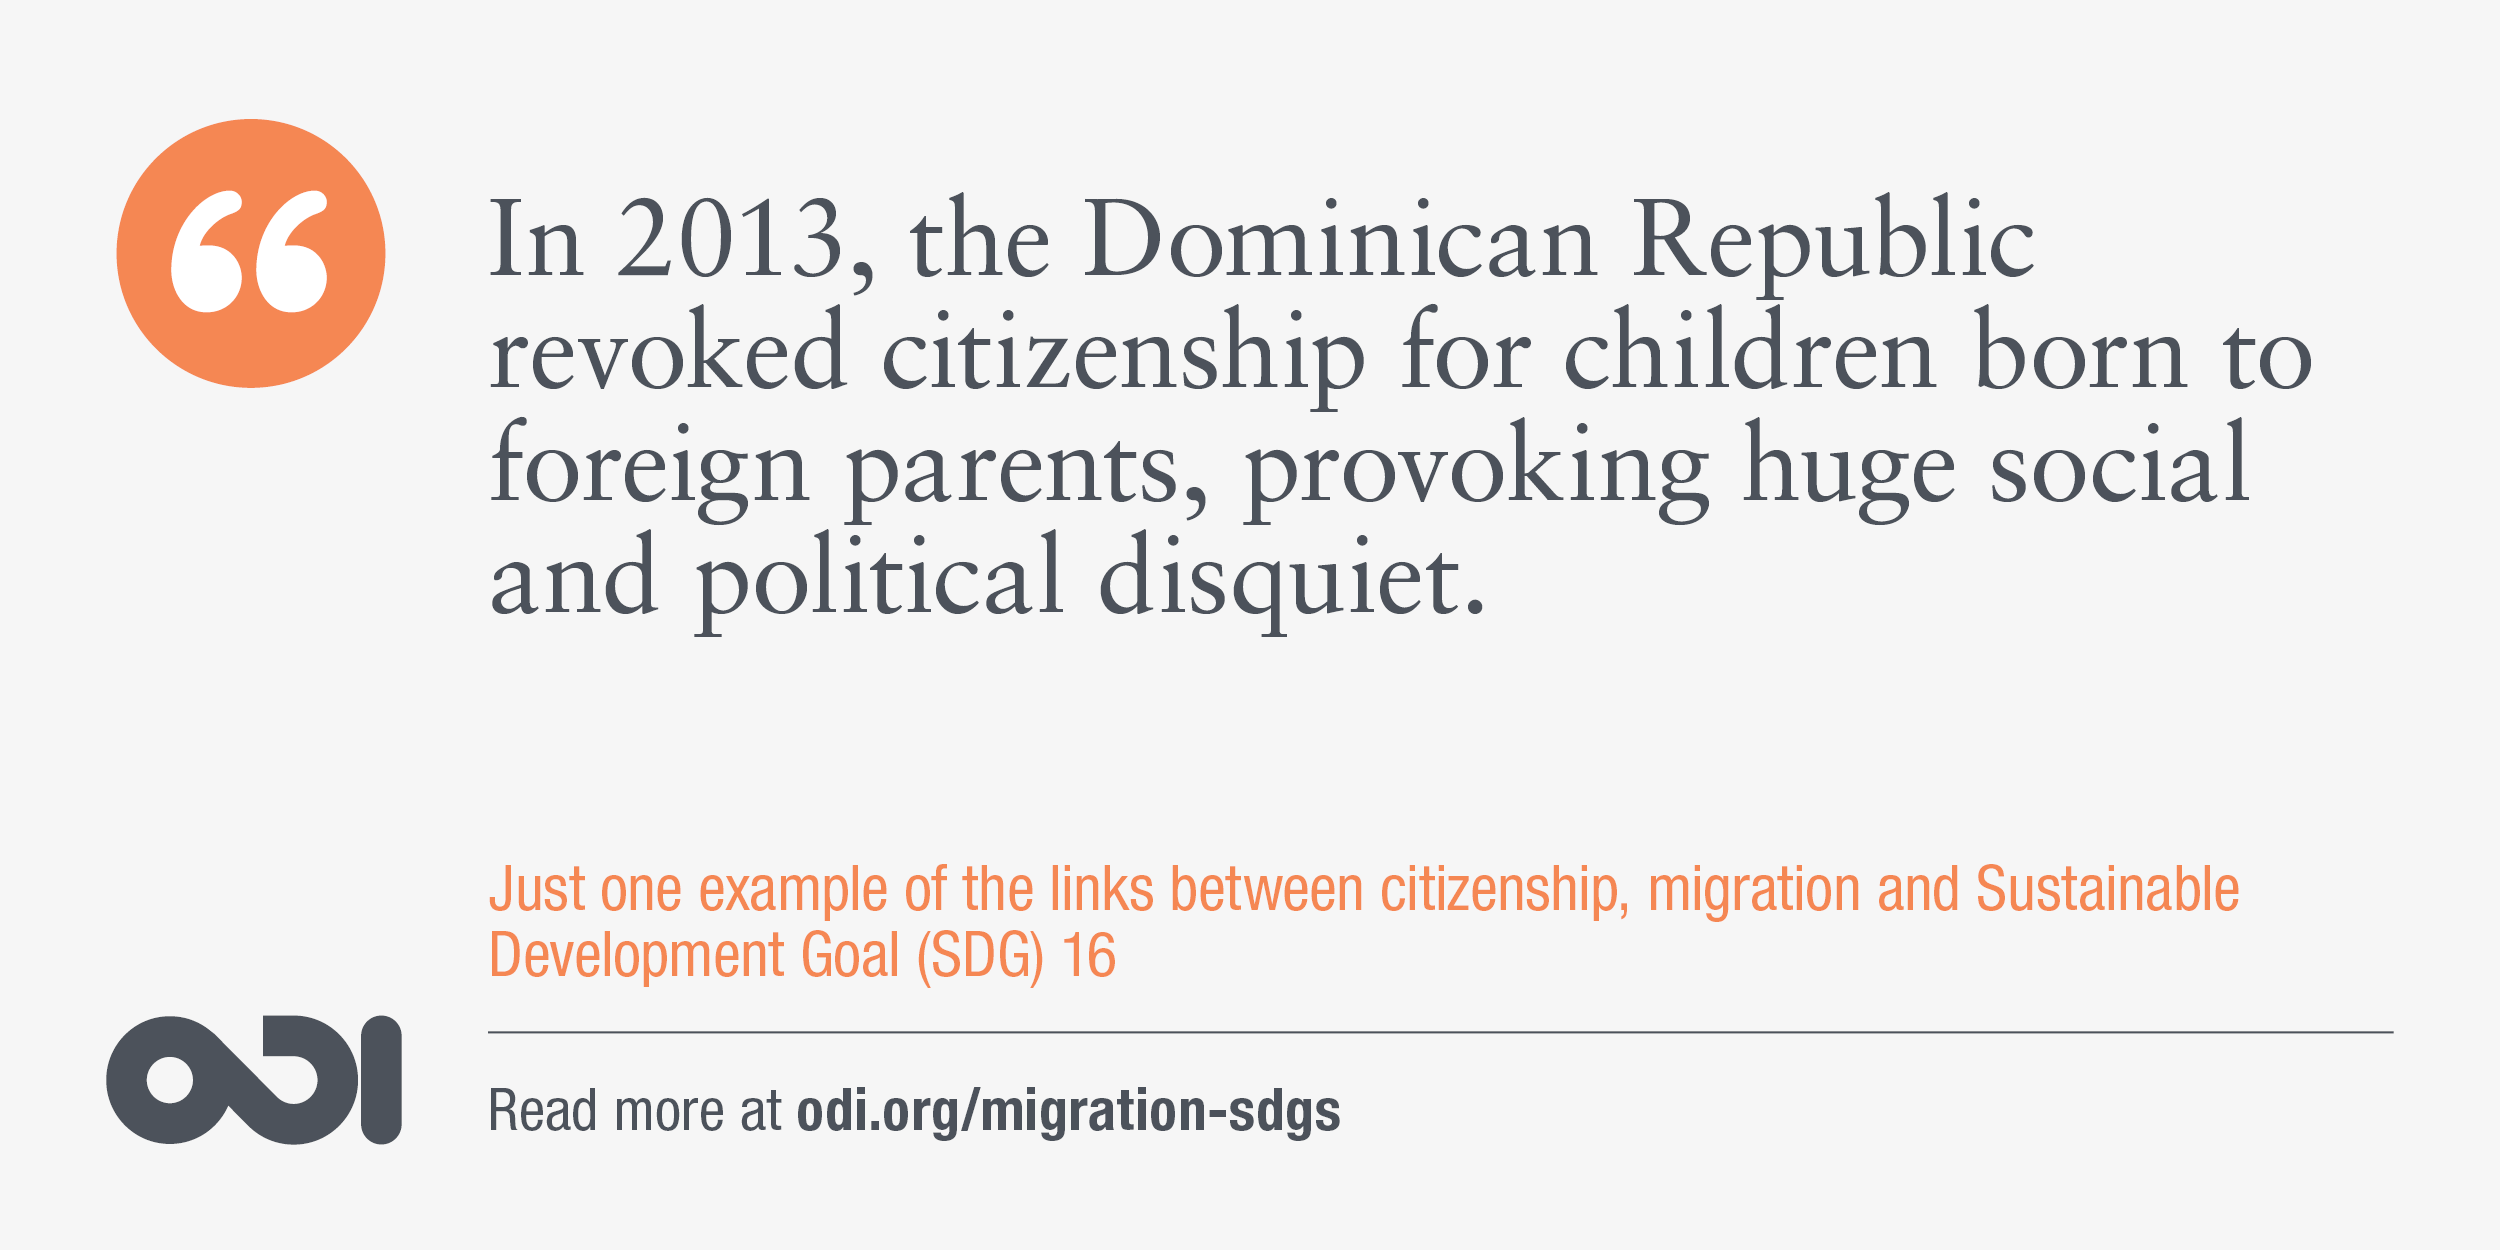 The links between citizenship, migration and SDG 16.